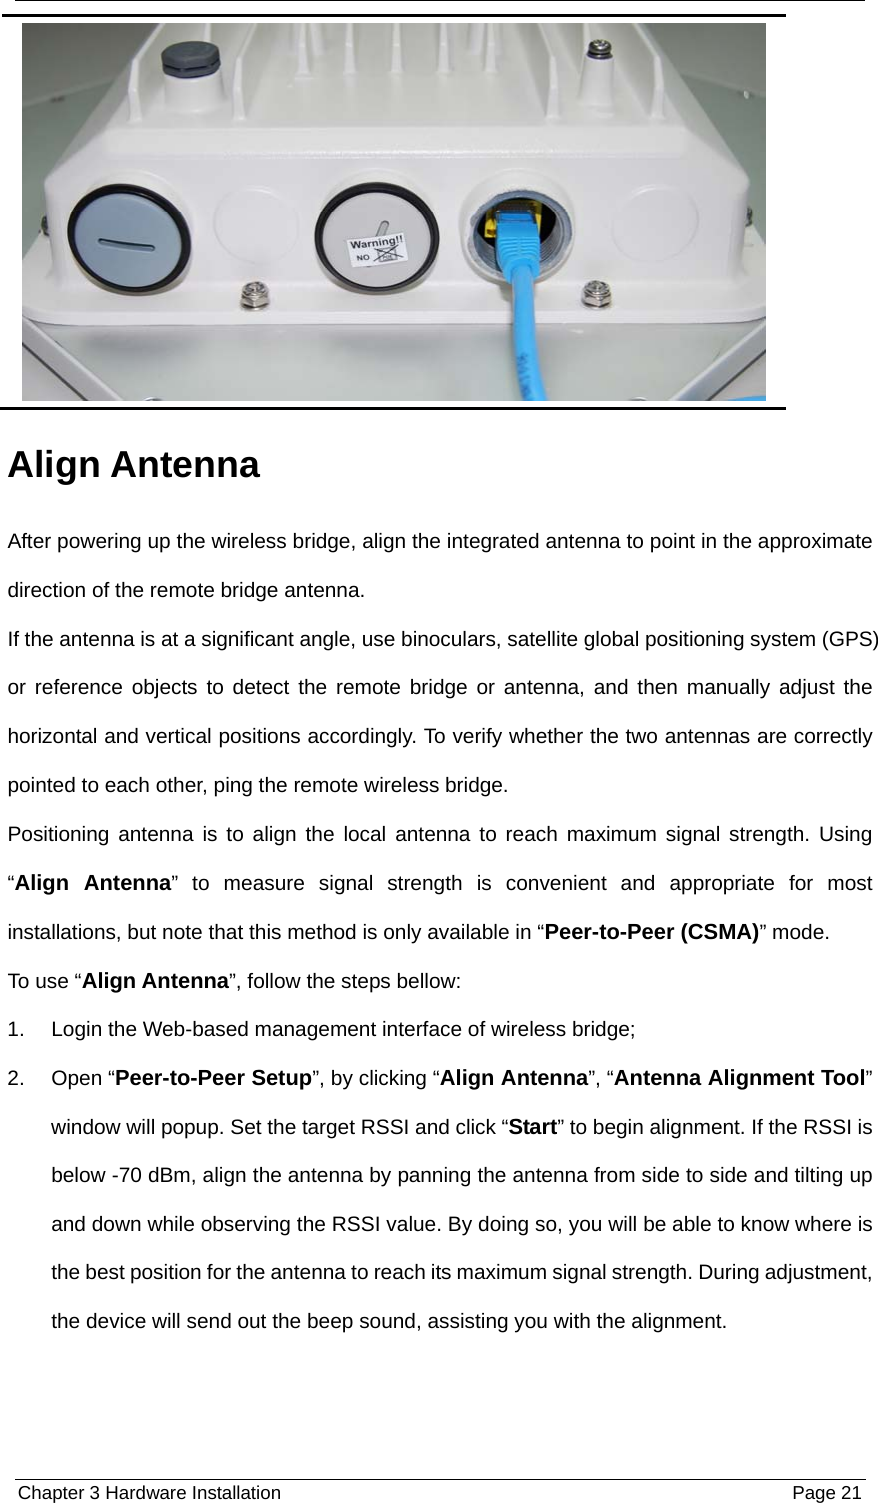  Chapter 3 Hardware Installation  Page 21 Align Antenna After powering up the wireless bridge, align the integrated antenna to point in the approximate direction of the remote bridge antenna. If the antenna is at a significant angle, use binoculars, satellite global positioning system (GPS) or reference objects to detect the remote bridge or antenna, and then manually adjust the horizontal and vertical positions accordingly. To verify whether the two antennas are correctly pointed to each other, ping the remote wireless bridge. Positioning antenna is to align the local antenna to reach maximum signal strength. Using “Align Antenna” to measure signal strength is convenient and appropriate for most installations, but note that this method is only available in “Peer-to-Peer (CSMA)” mode. To use “Align Antenna”, follow the steps bellow: 1.  Login the Web-based management interface of wireless bridge; 2. Open “Peer-to-Peer Setup”, by clicking “Align Antenna”, “Antenna Alignment Tool” window will popup. Set the target RSSI and click “Start” to begin alignment. If the RSSI is below -70 dBm, align the antenna by panning the antenna from side to side and tilting up and down while observing the RSSI value. By doing so, you will be able to know where is the best position for the antenna to reach its maximum signal strength. During adjustment, the device will send out the beep sound, assisting you with the alignment. 